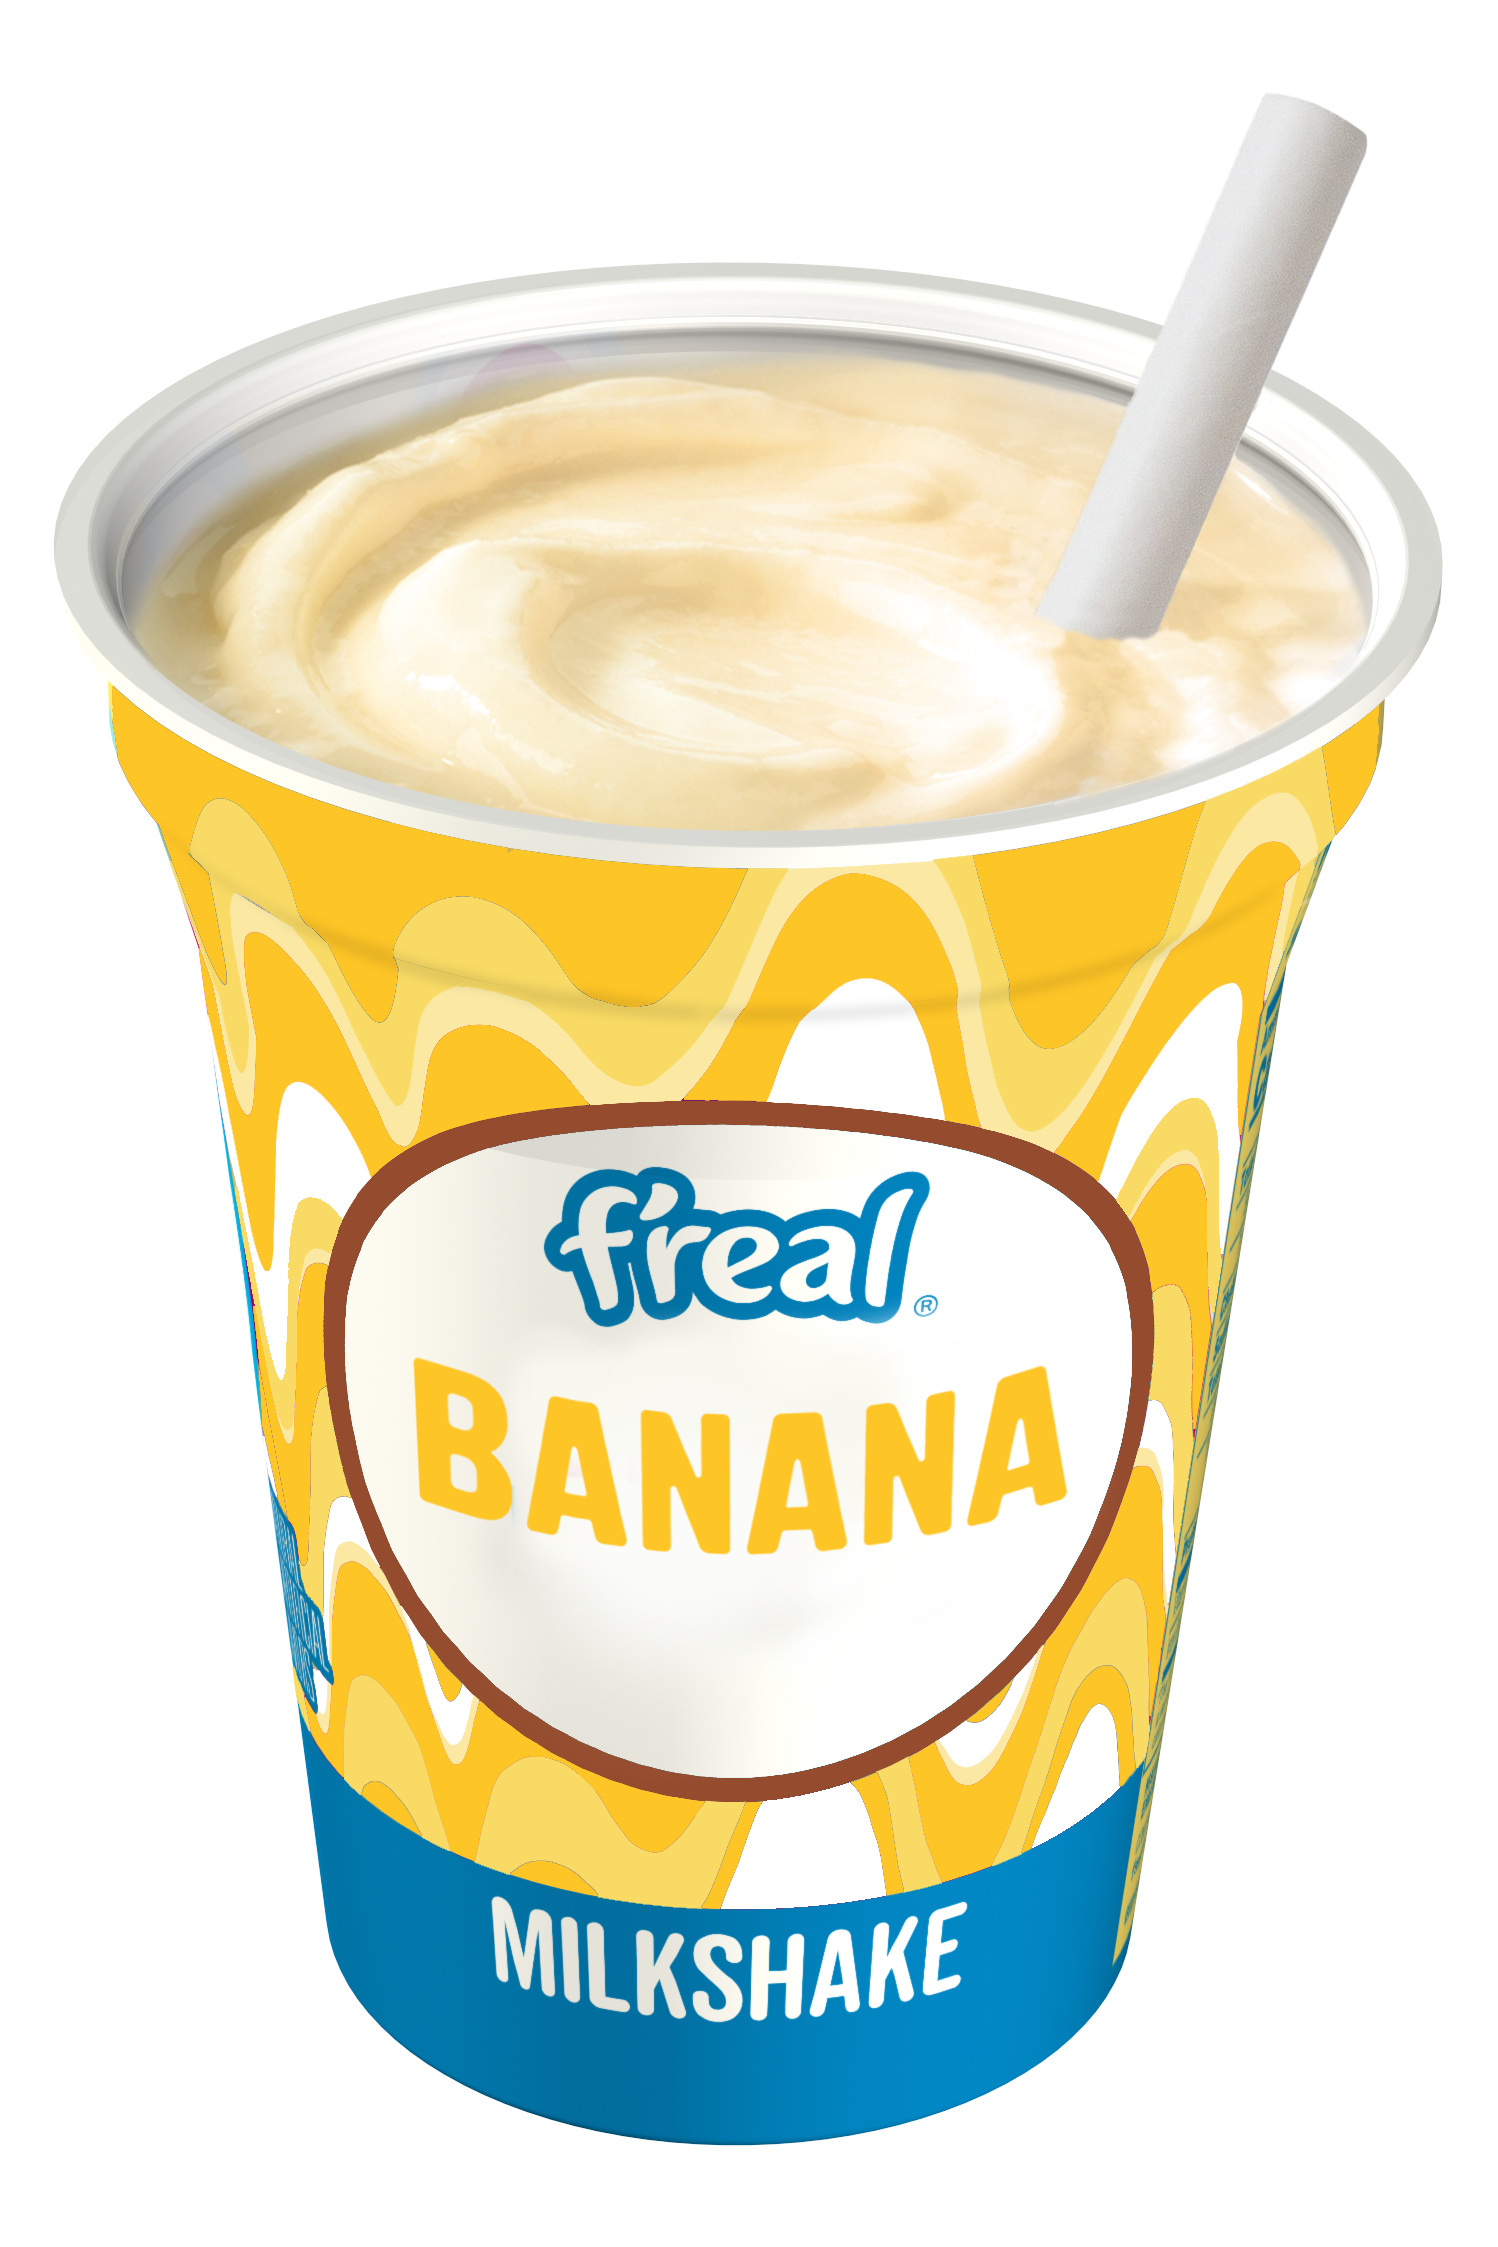 Shake up your sales with new f’real sampling packs